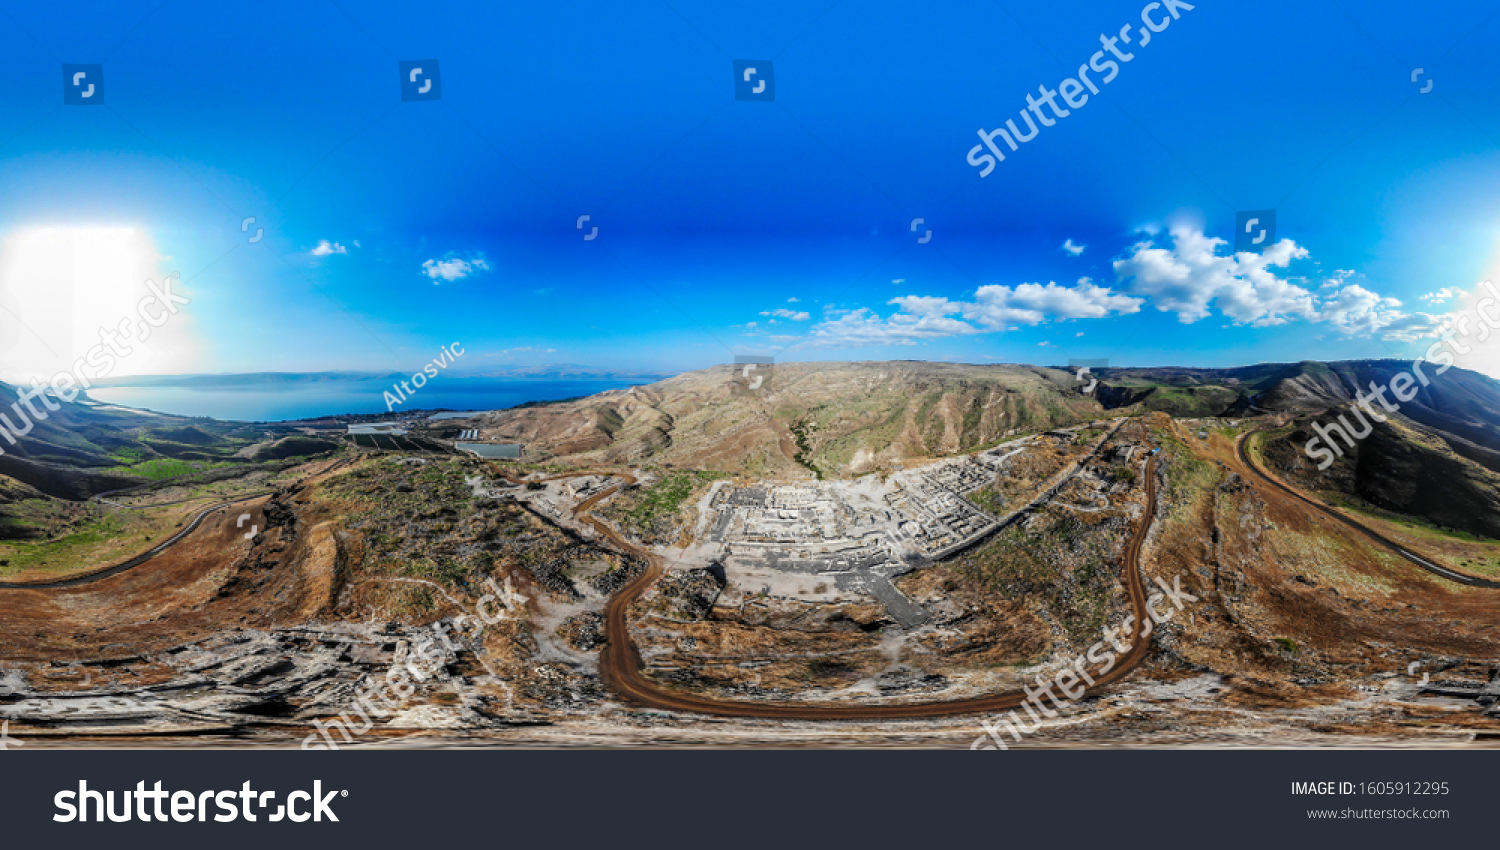 The ancient city of Hippos-Sussita of the Decapolis (Antiochia Hippos) is located 2 km. east of the
Sea of Galilee, on the top of a flat, diamond shaped mountain. Israel. Panorama 360. #1605912295